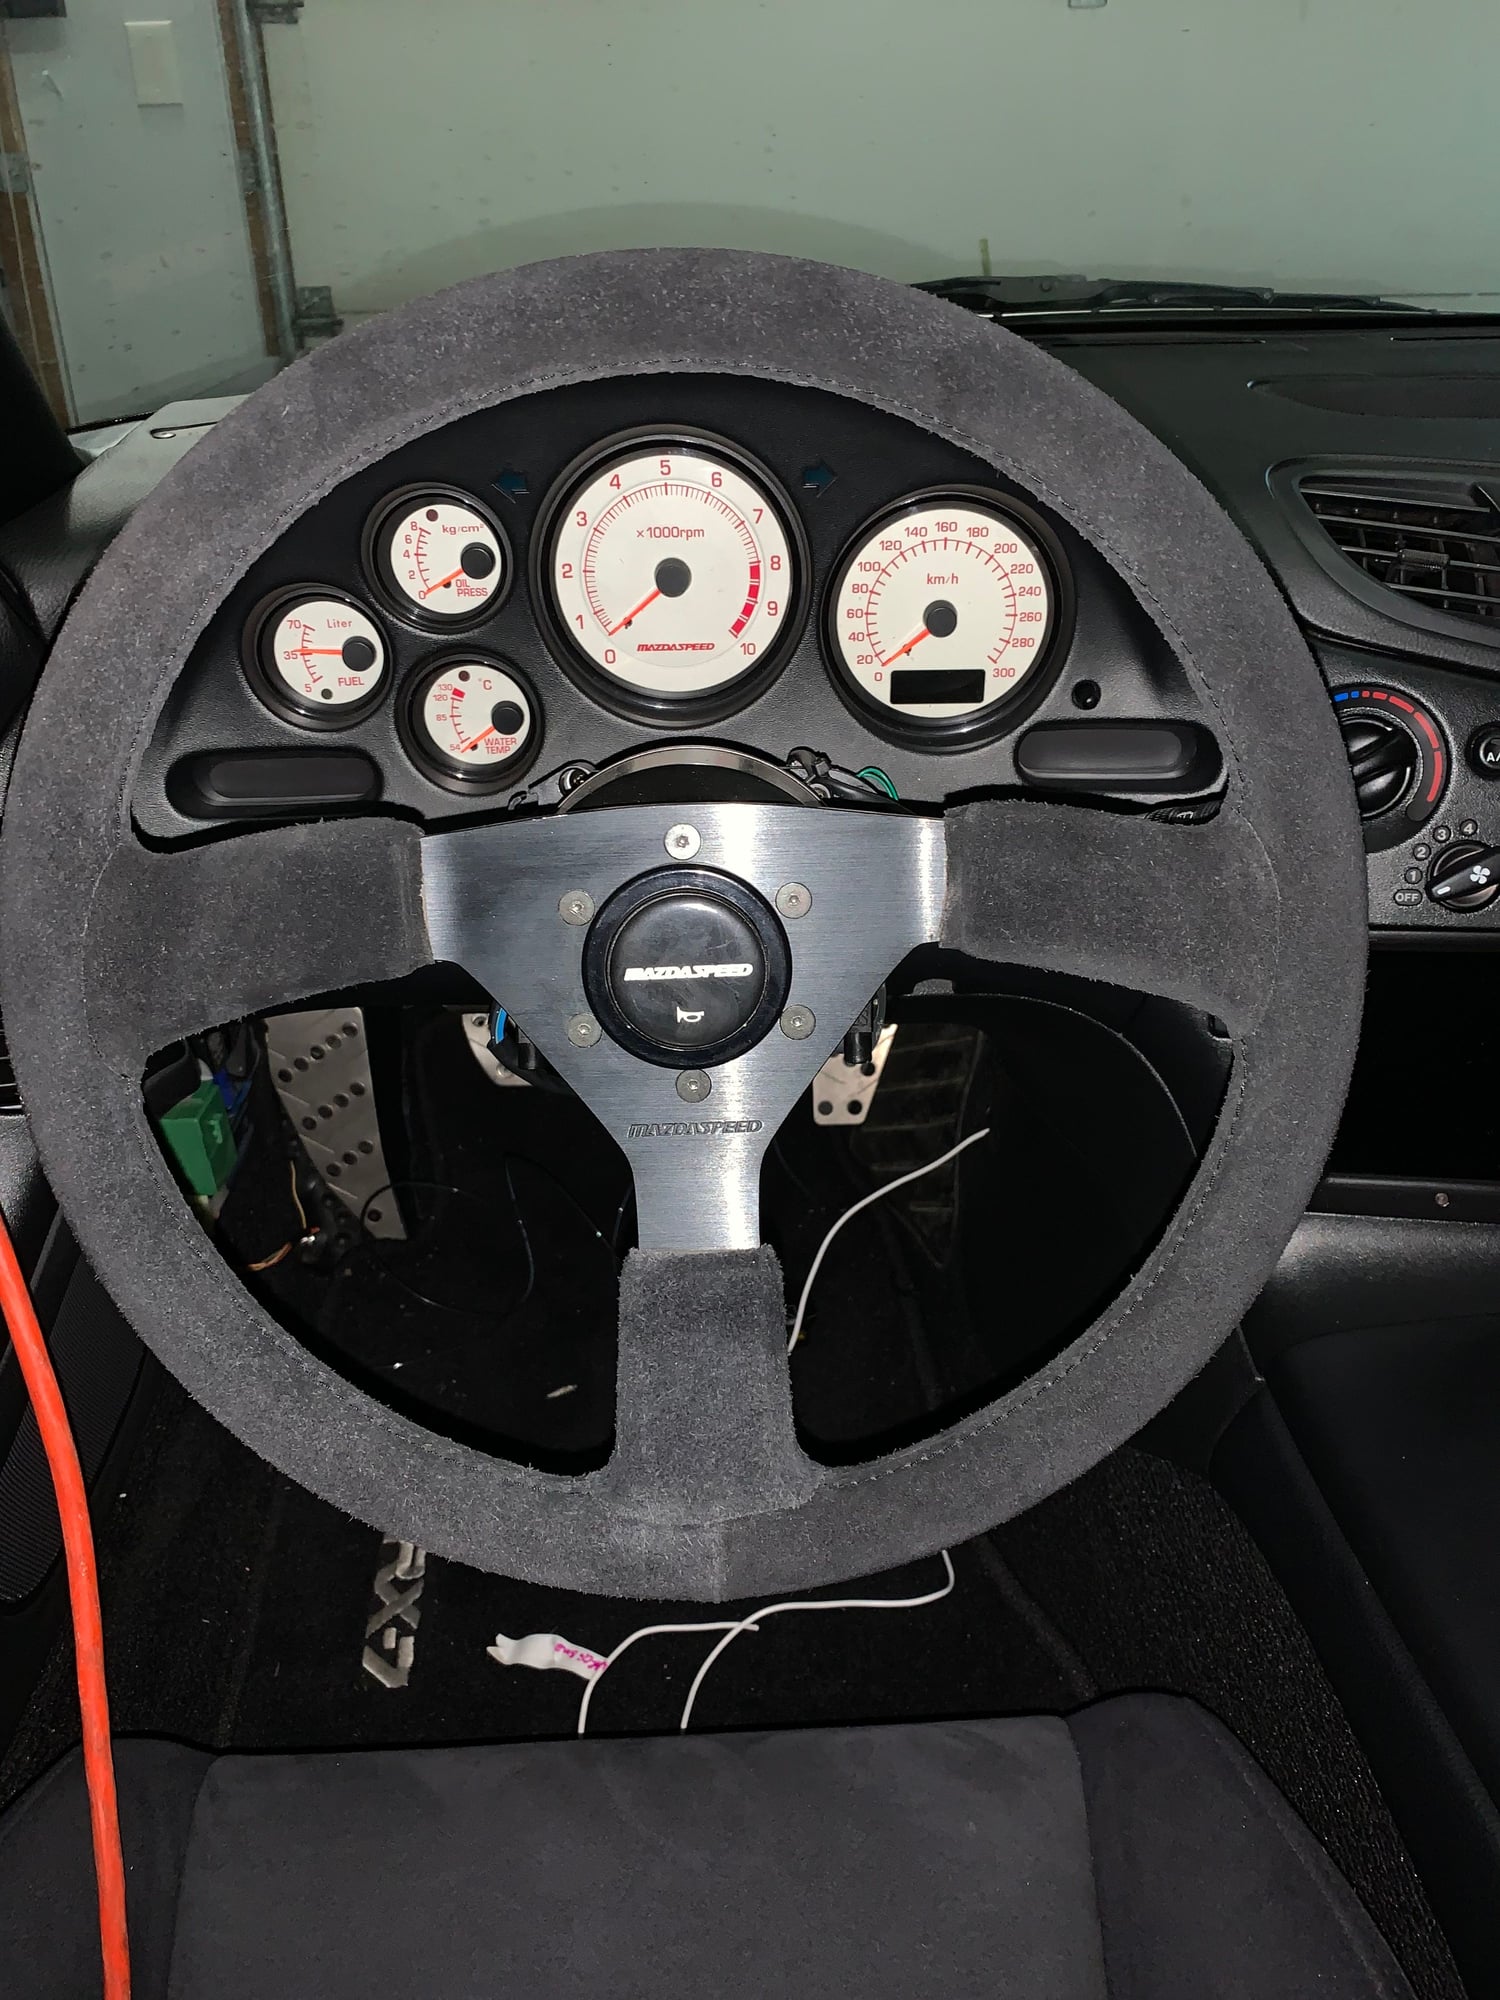 Engine - Electrical - Mazdaspeed Dash and Wheel for Sale - Used - 1993 to 2002 Mazda RX-7 - Allentown, PA 18031, United States